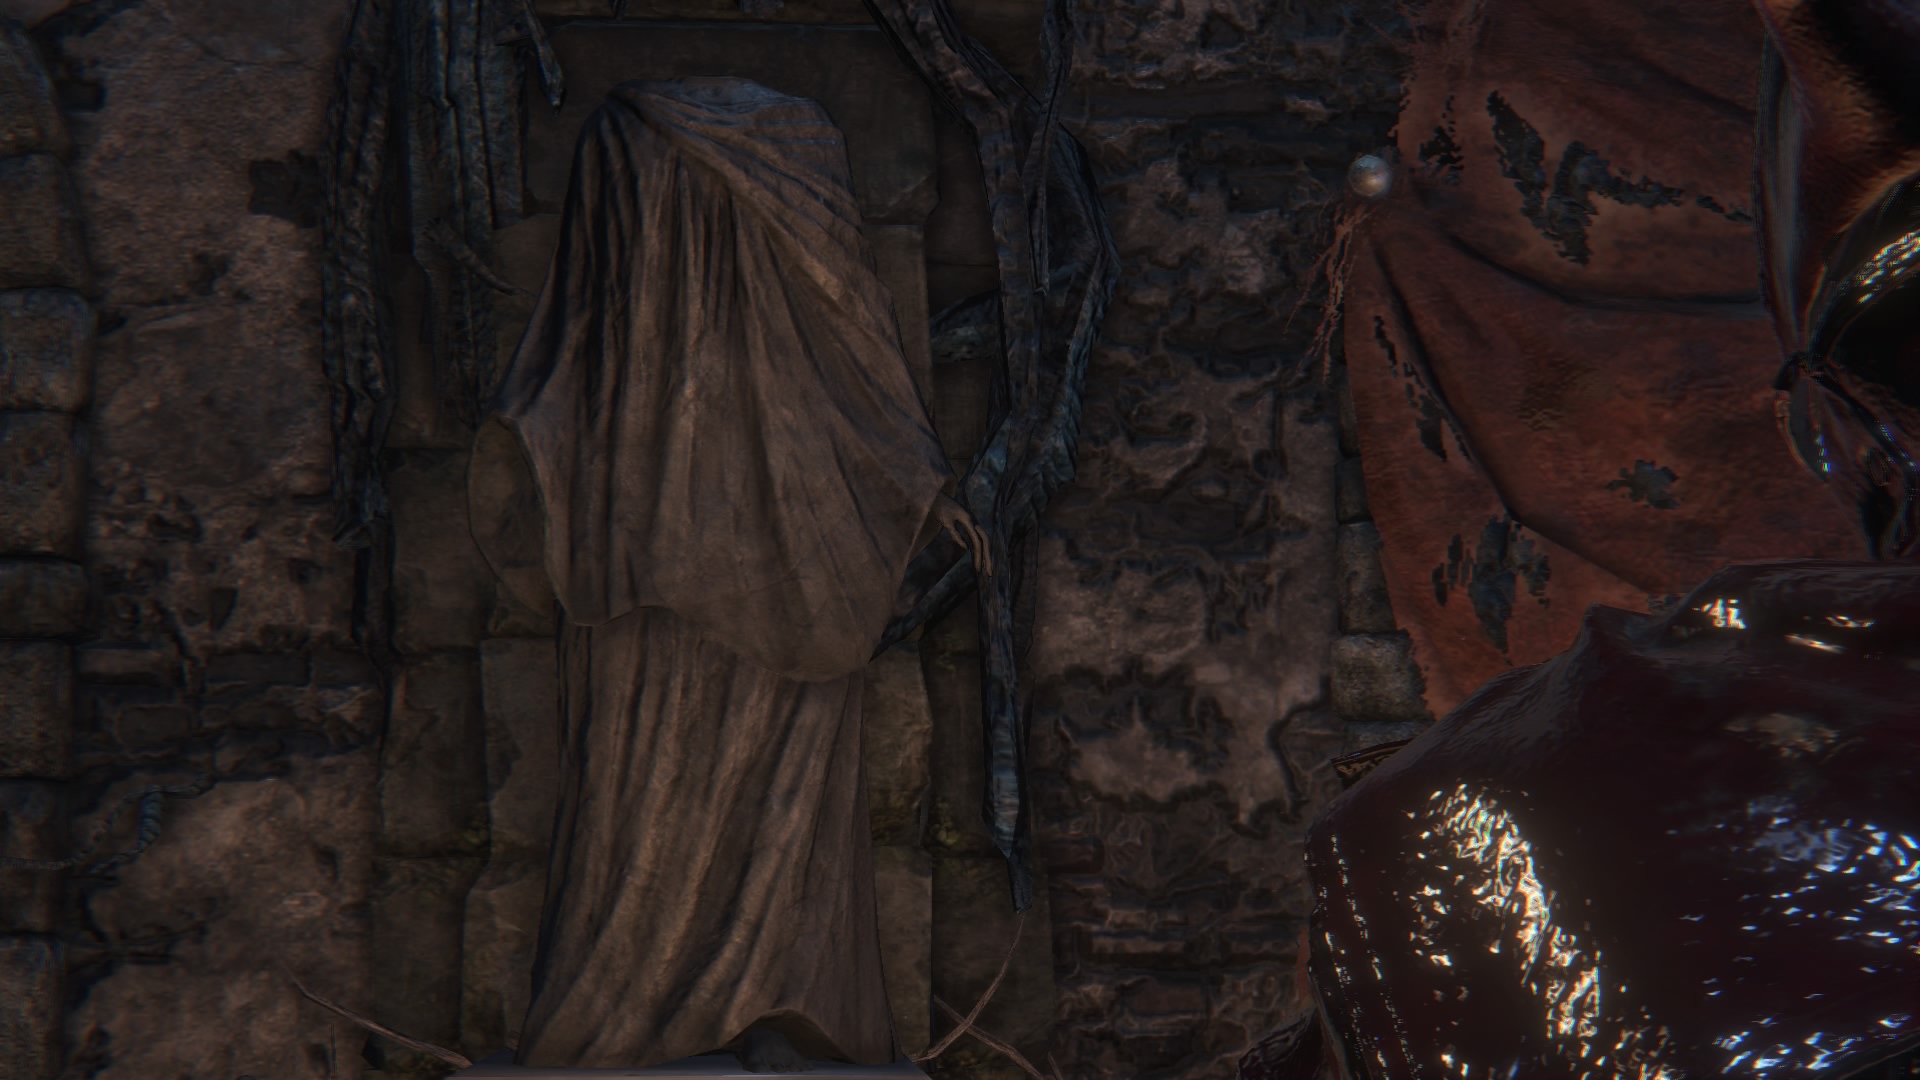 Headless Woman of The Labyrinth